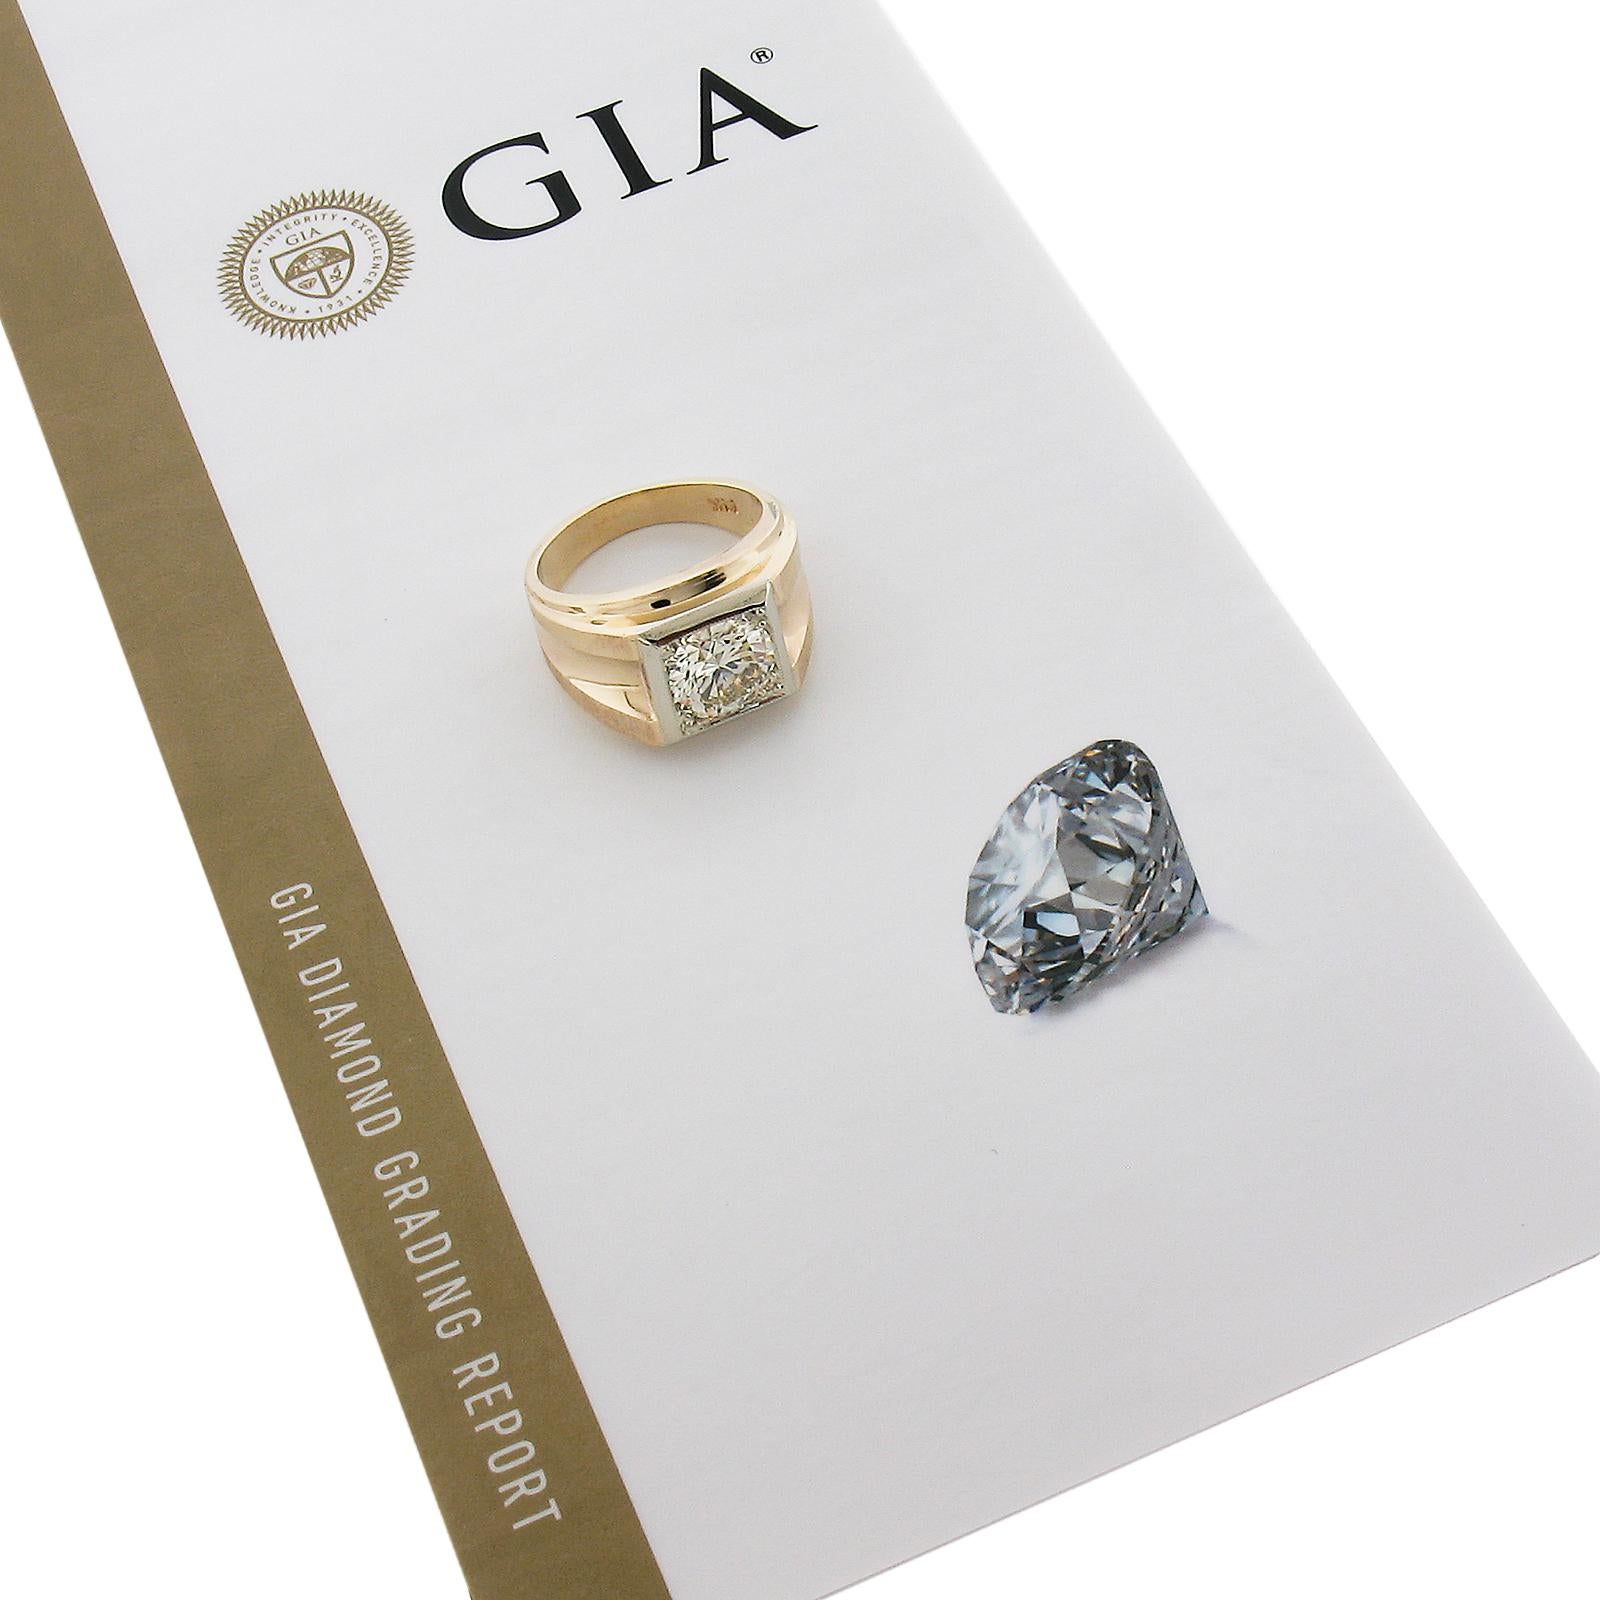 This bold and substantial men's diamond ring is crafted in yellow gold with white gold square setting and features a 3.15 carat round brilliant cut diamond that's been graded by GIA for having excellent cut and polish as well as very good symmetry